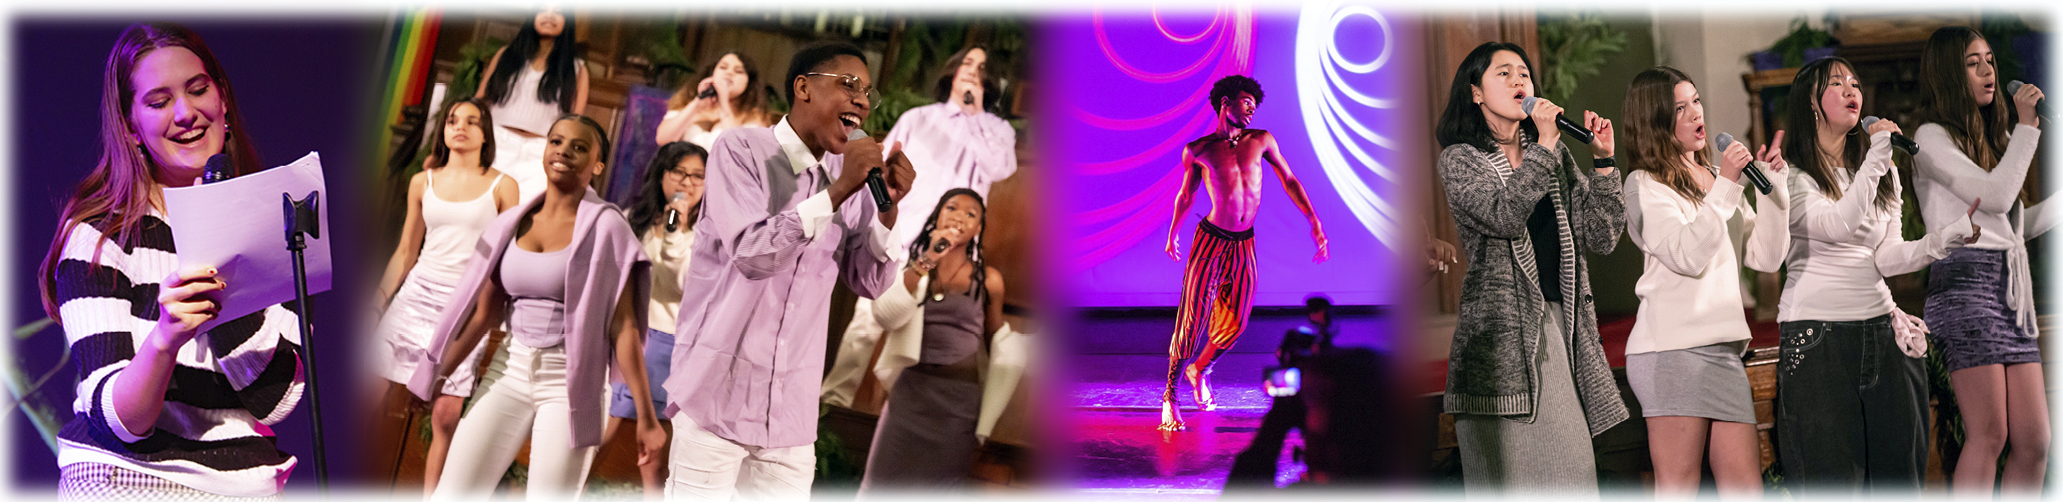 Student Performance photo Collage